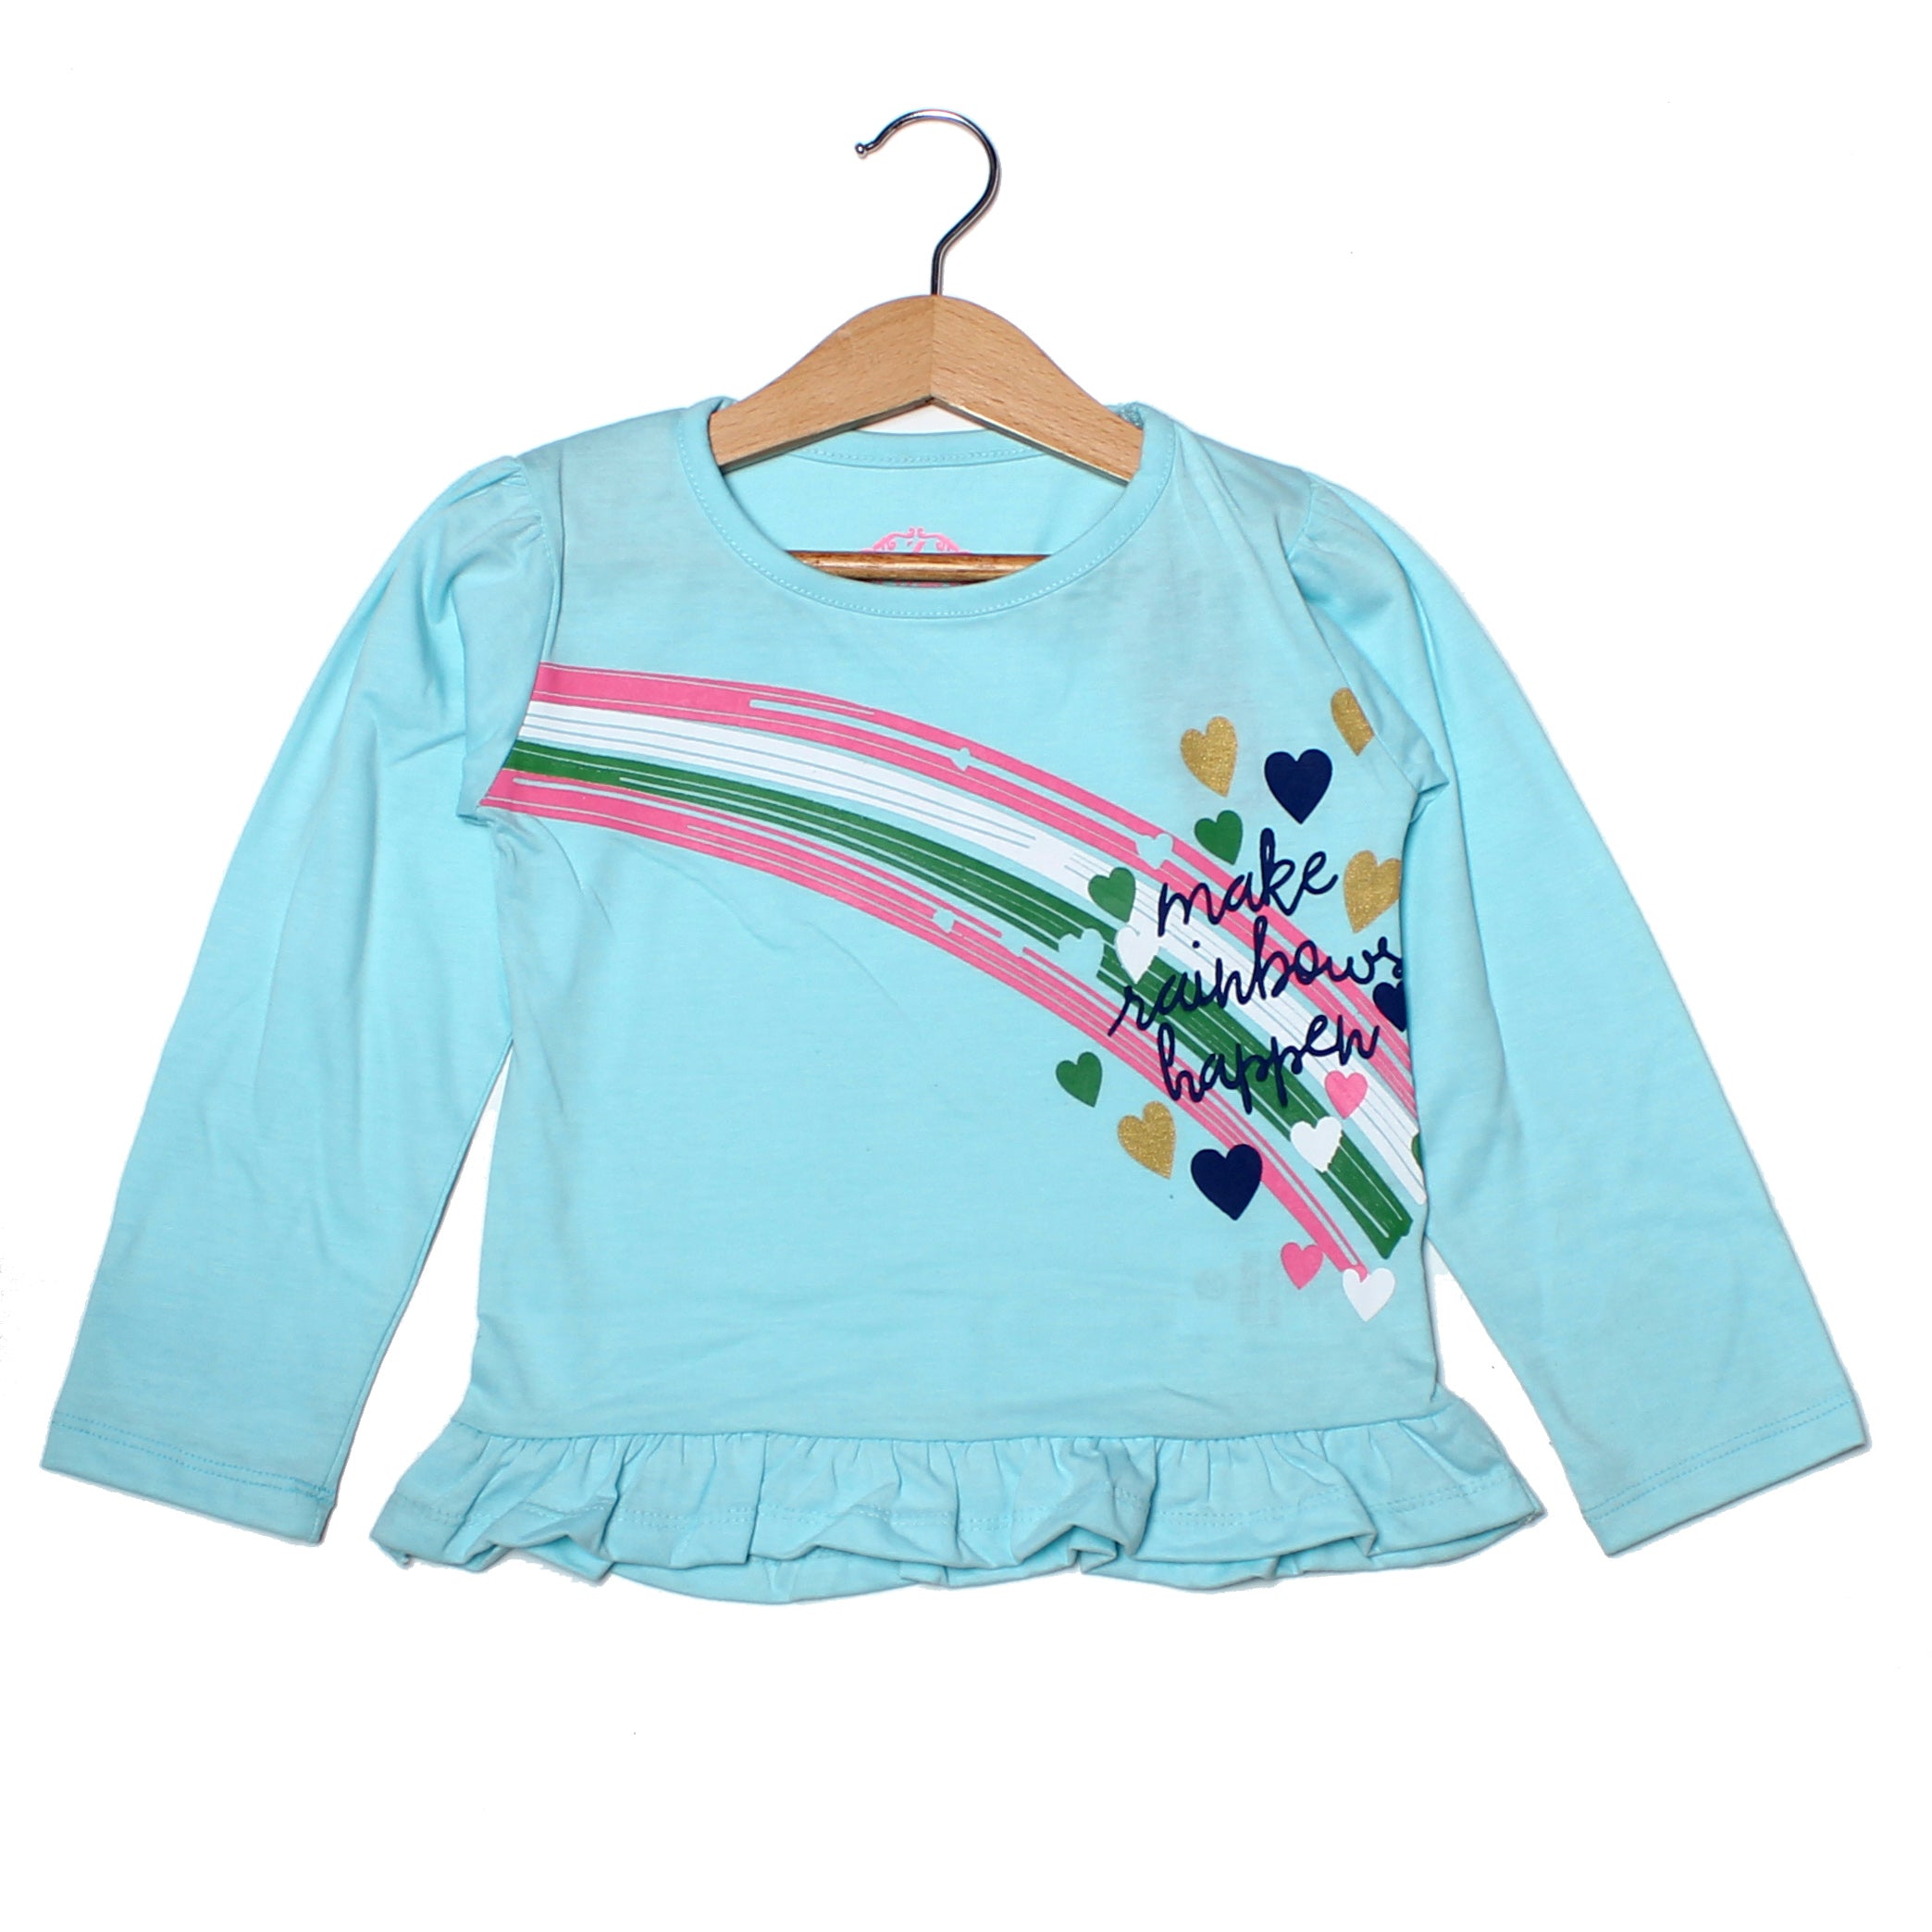 NEW SKY BLUE MAKE RAINBOWS PRINTED T-SHIRT TOP FOR GIRLS